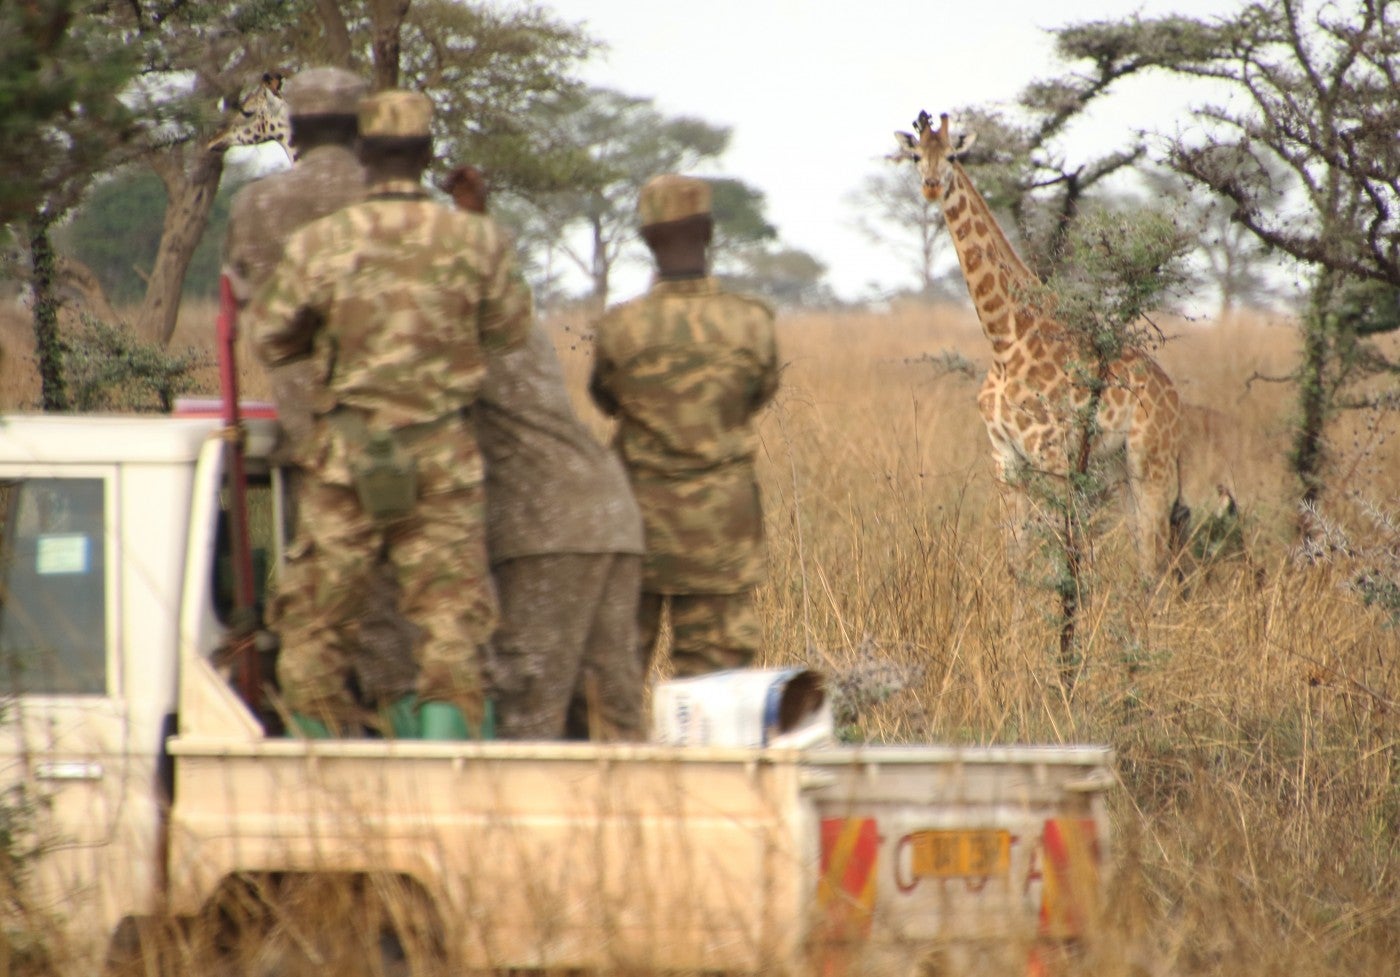 A group of rangers stand in the bed of a small truck and observe a giraffe that stands in the tall grasses in the distance